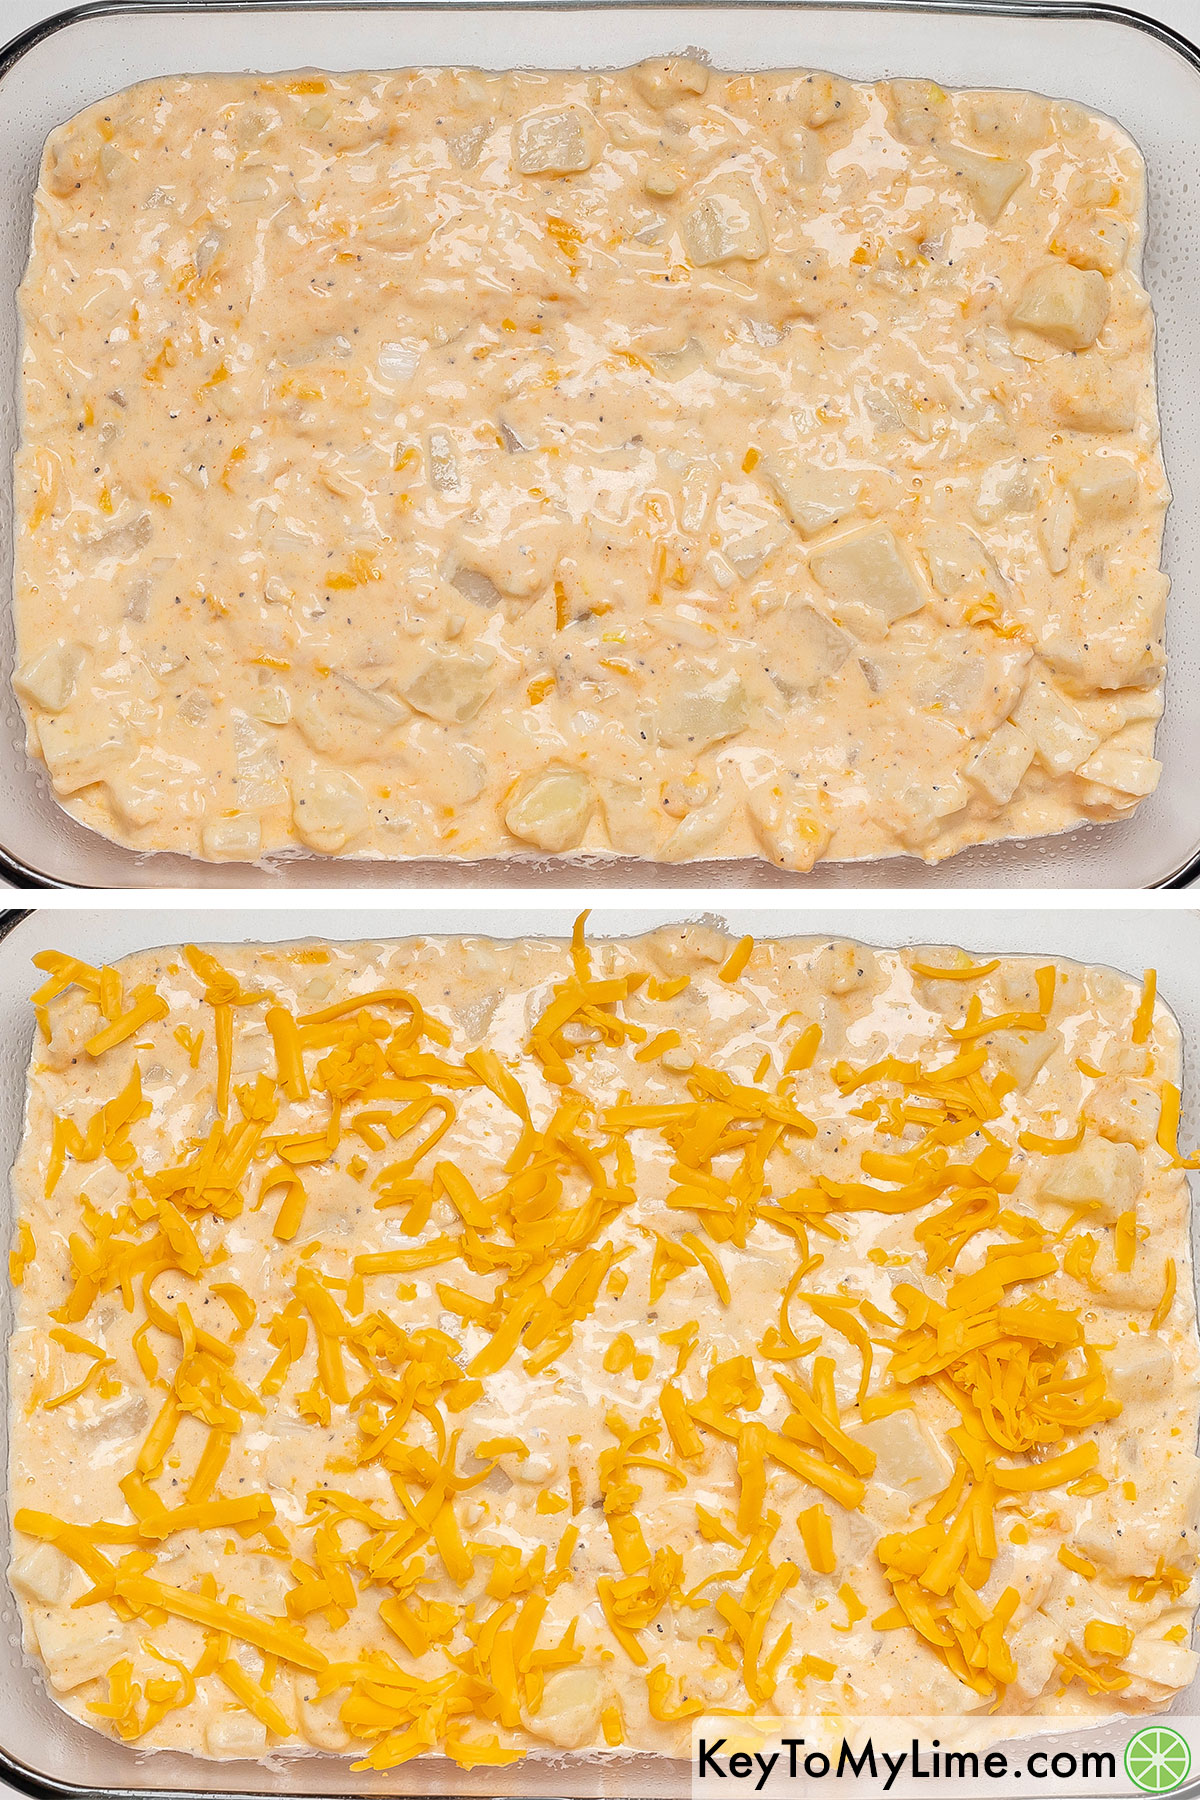 Pouring the cheesy potato mixture into a casserole dish and then topping with the remaining cheddar cheese on top.